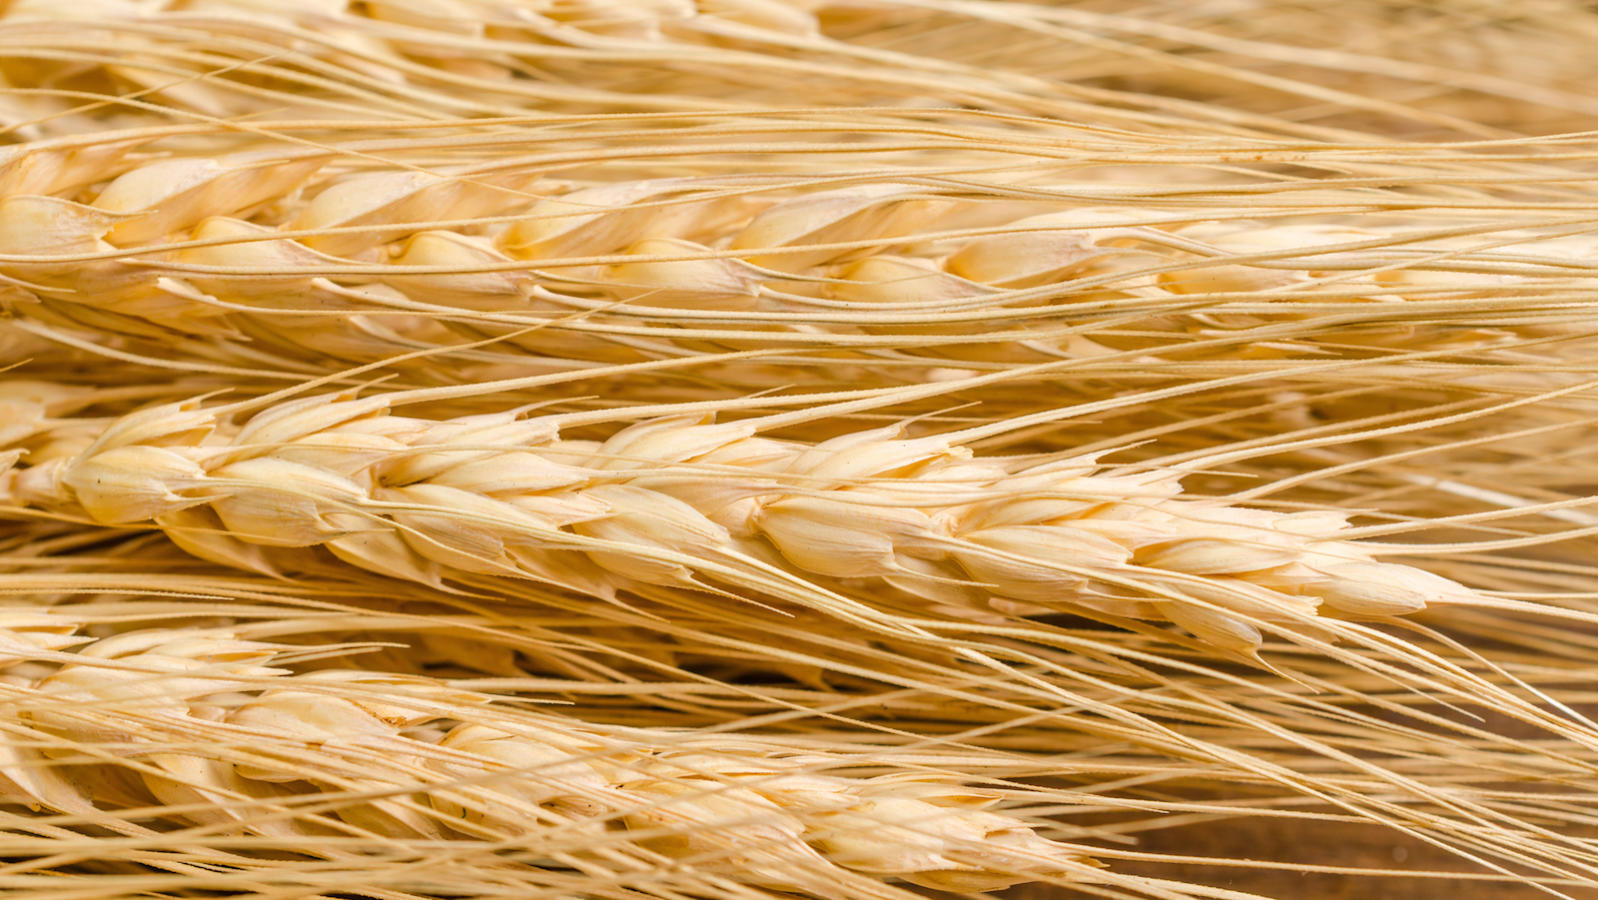 Barley grain for Passover and counting the omer